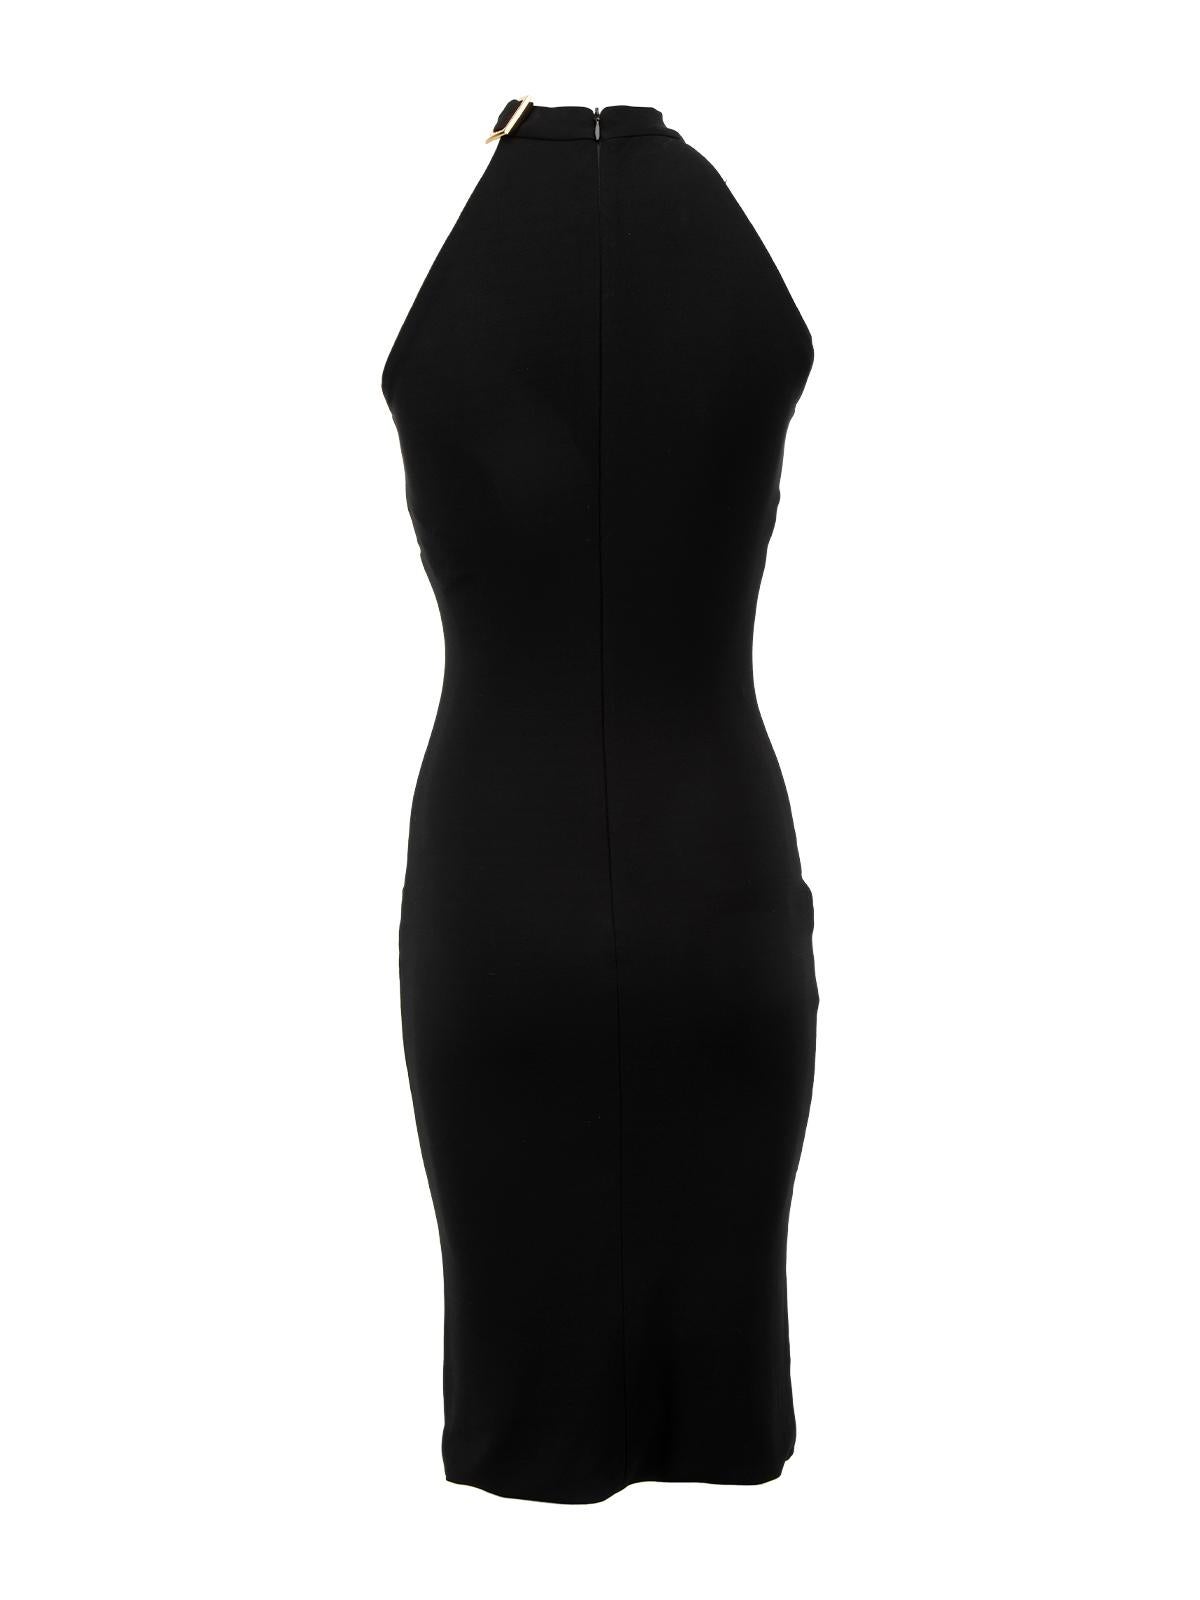 Dolce & Gabbana Women's Black Buckle Halter Neck Dress In Excellent Condition For Sale In London, GB